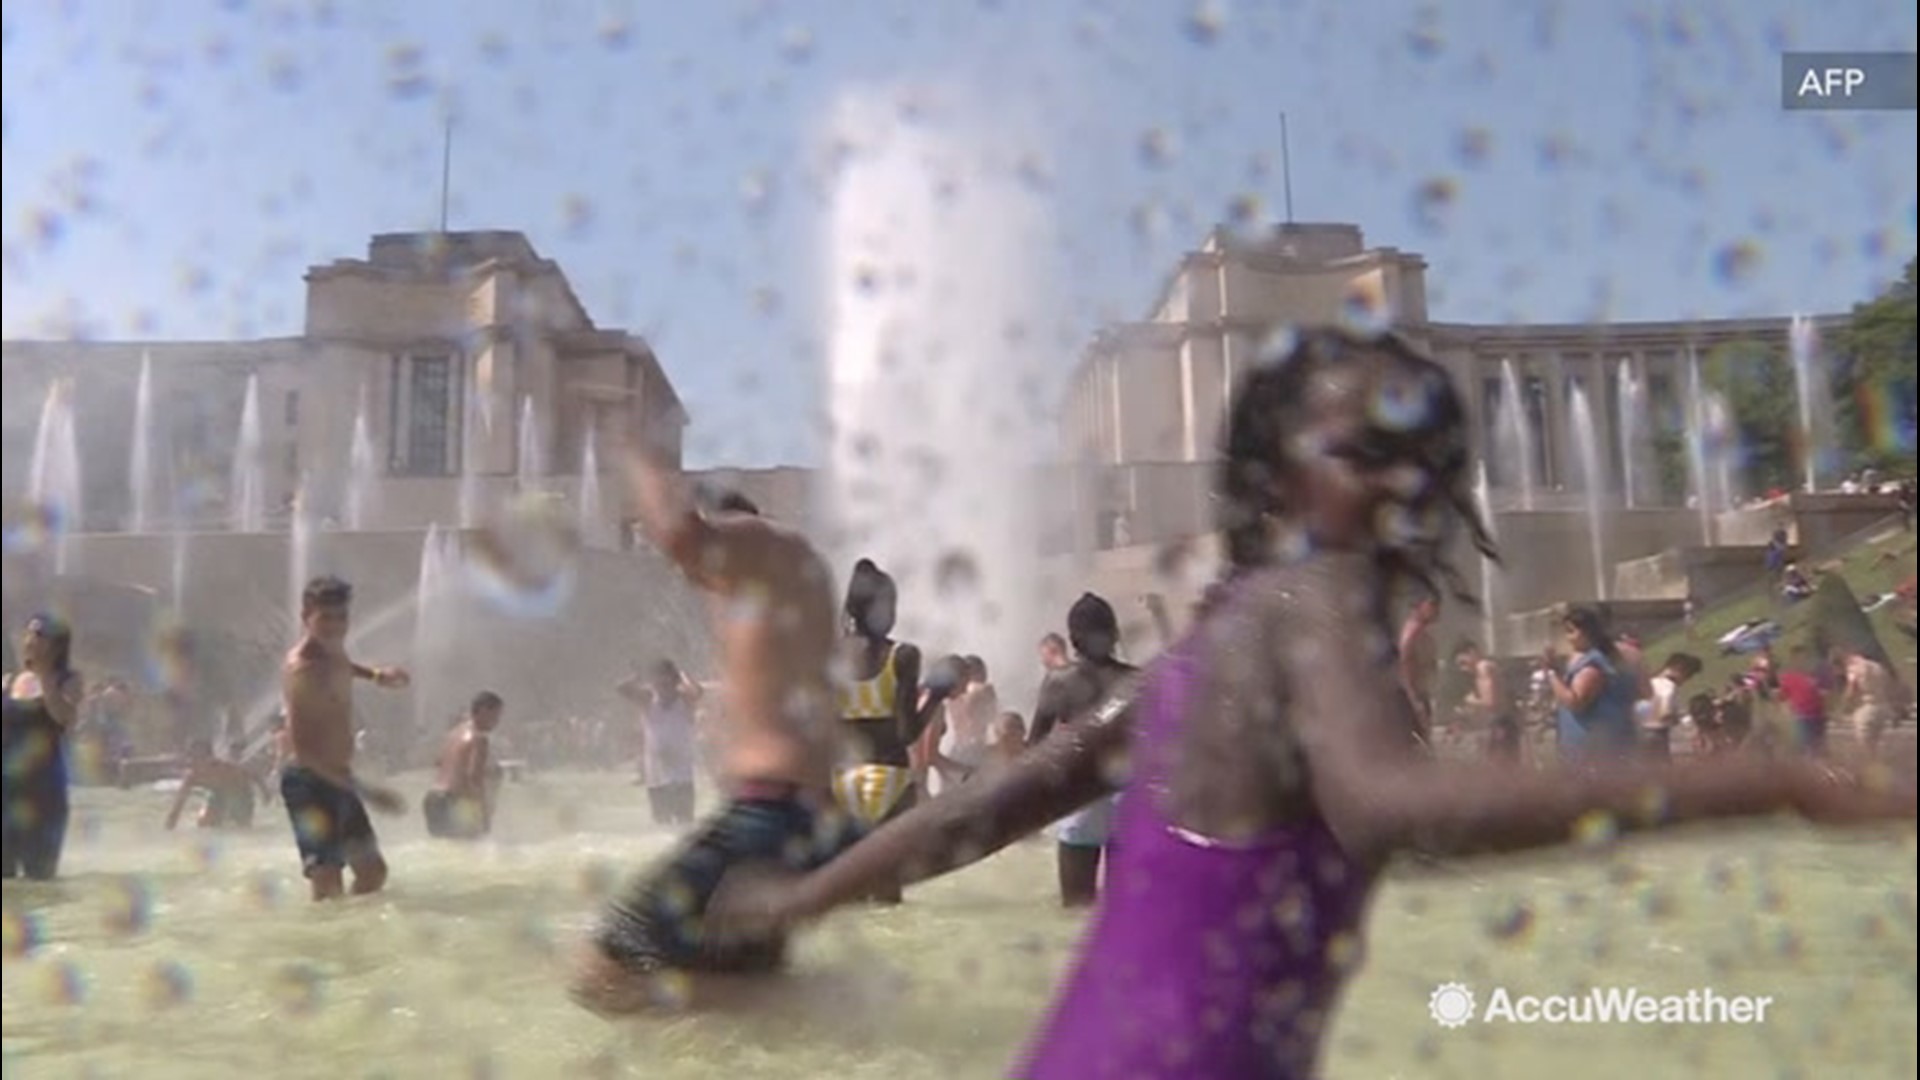 People across Europe fled to the water or the parks to cope with a widespread heat wave on July 24 and July 25. All-time record high temperatures were smashed across Europe.